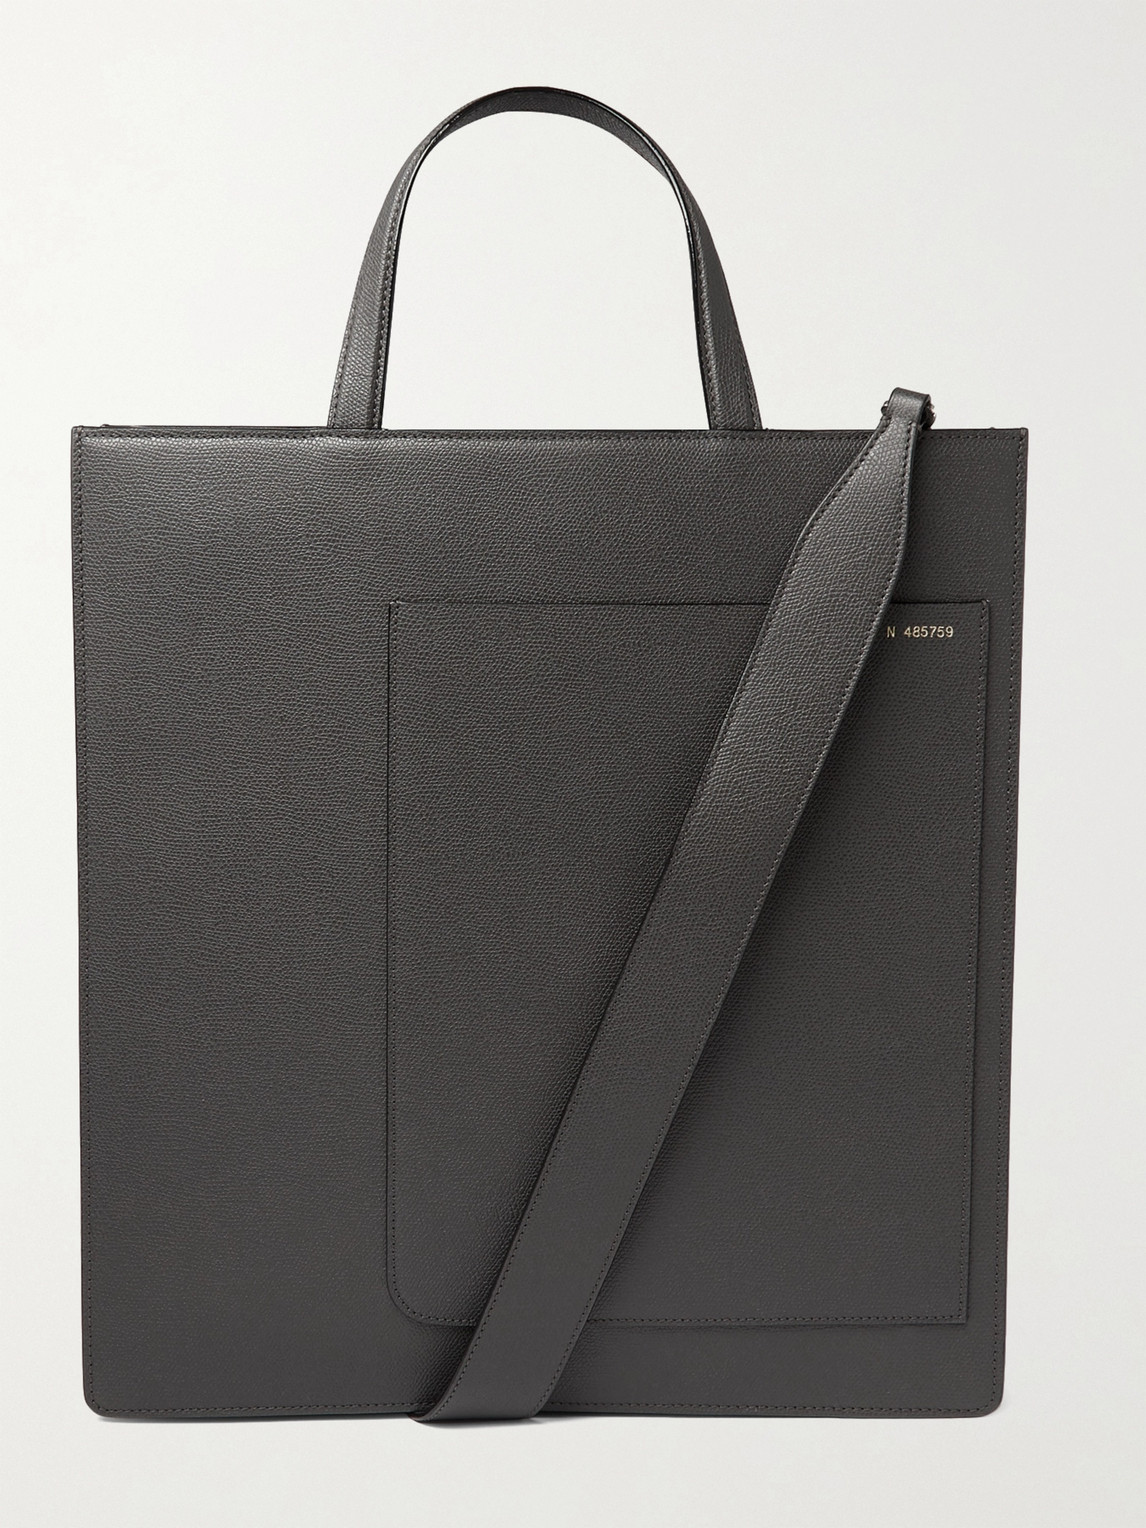 Valextra Pebble-grain Leather Tote Bag In Gray